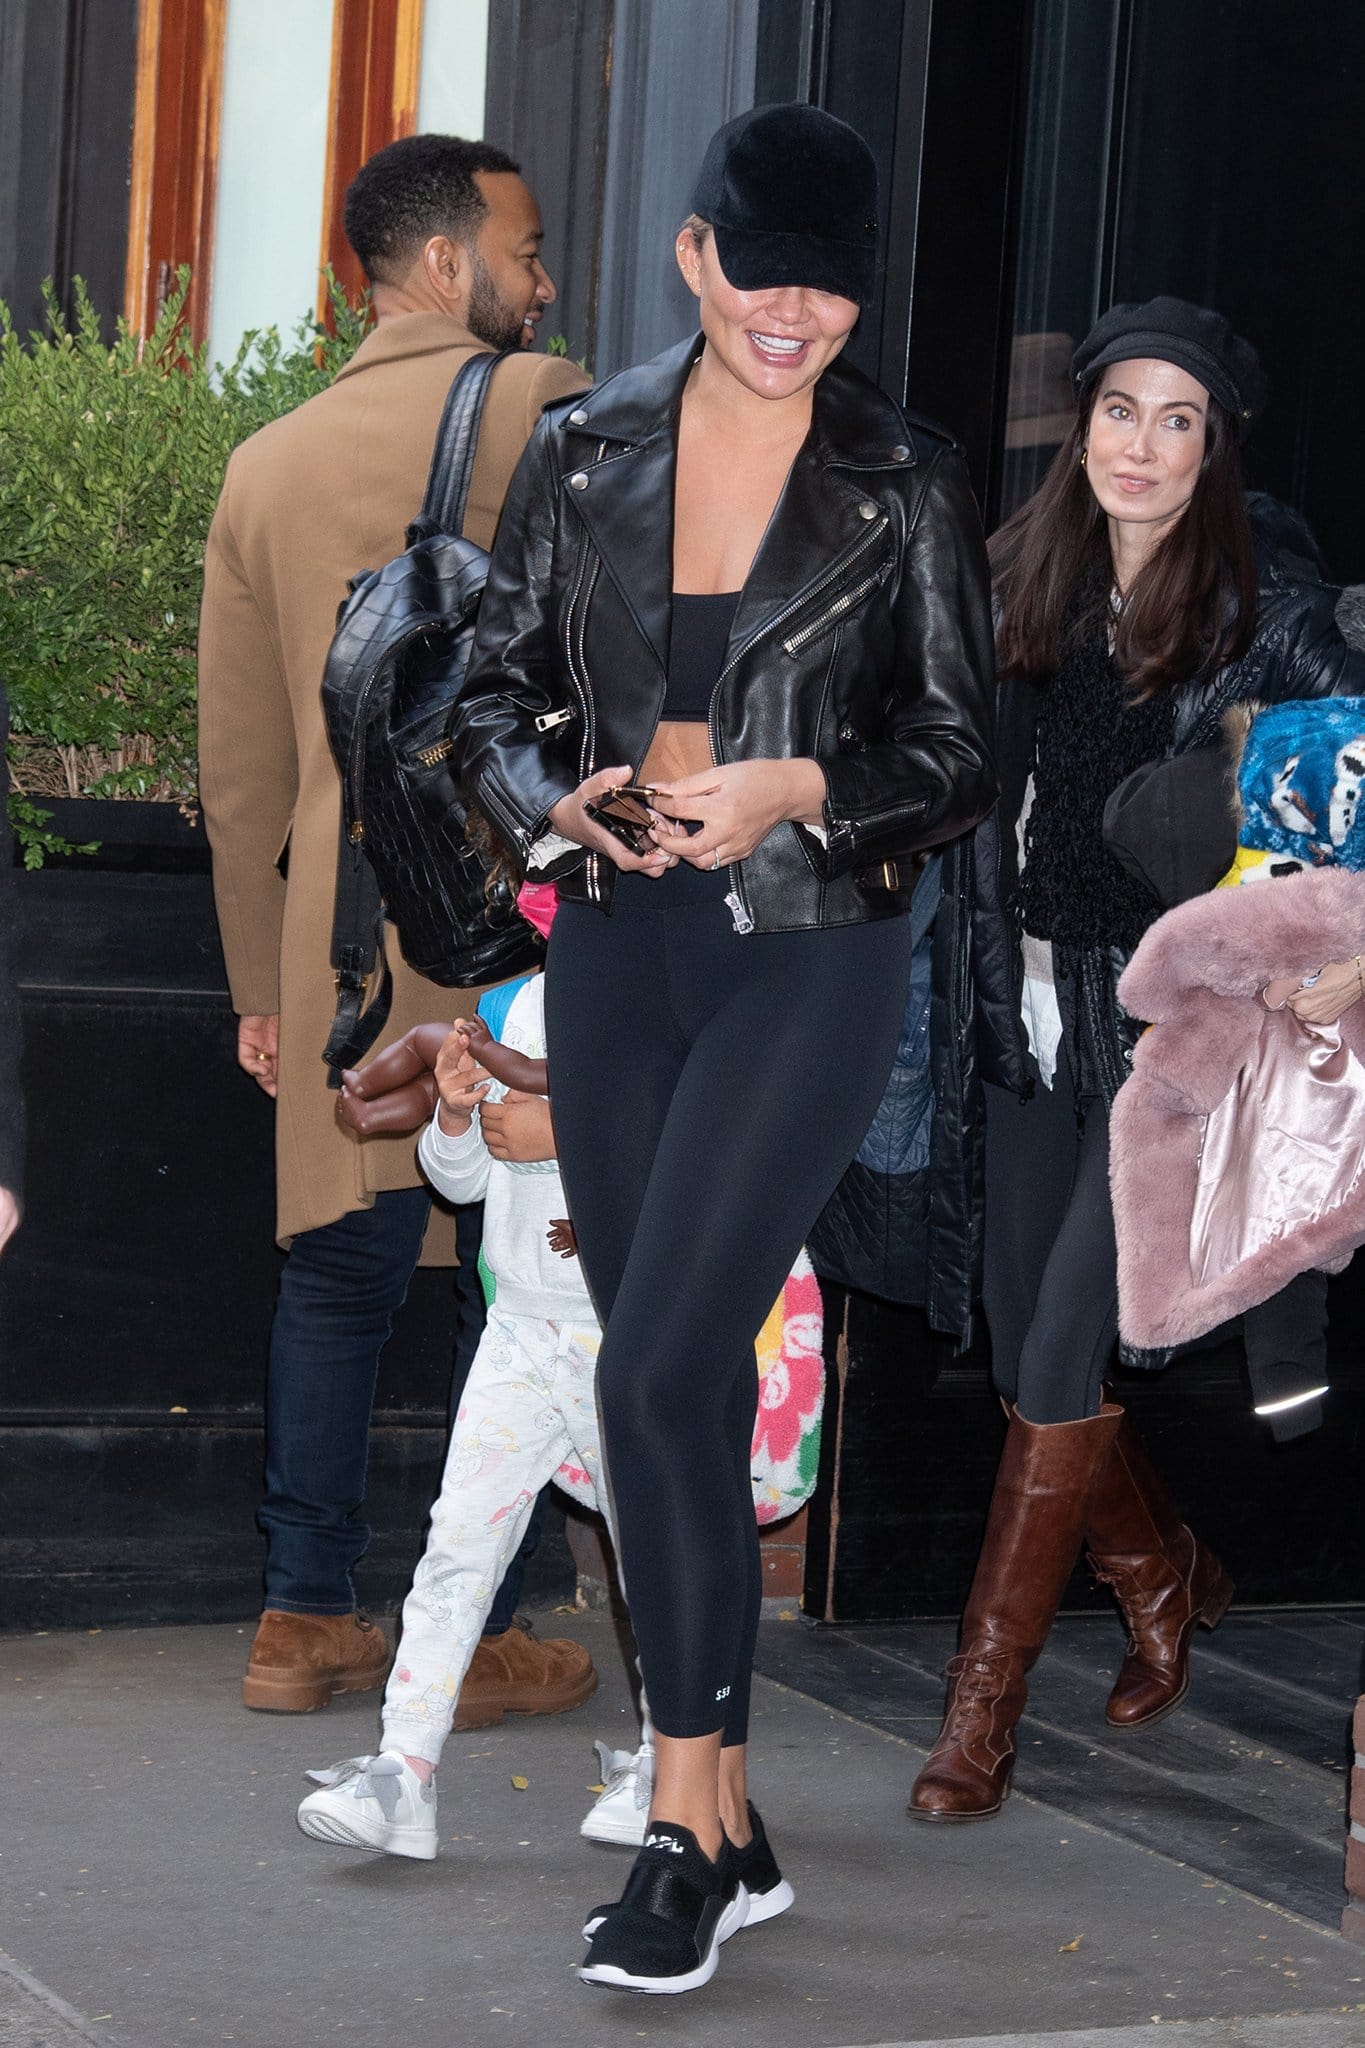 Chrissy Teigen opts for a sleek athleisure in a black bandeau top, Splits59 leggings, and Gucci black leather motorcycle jacket